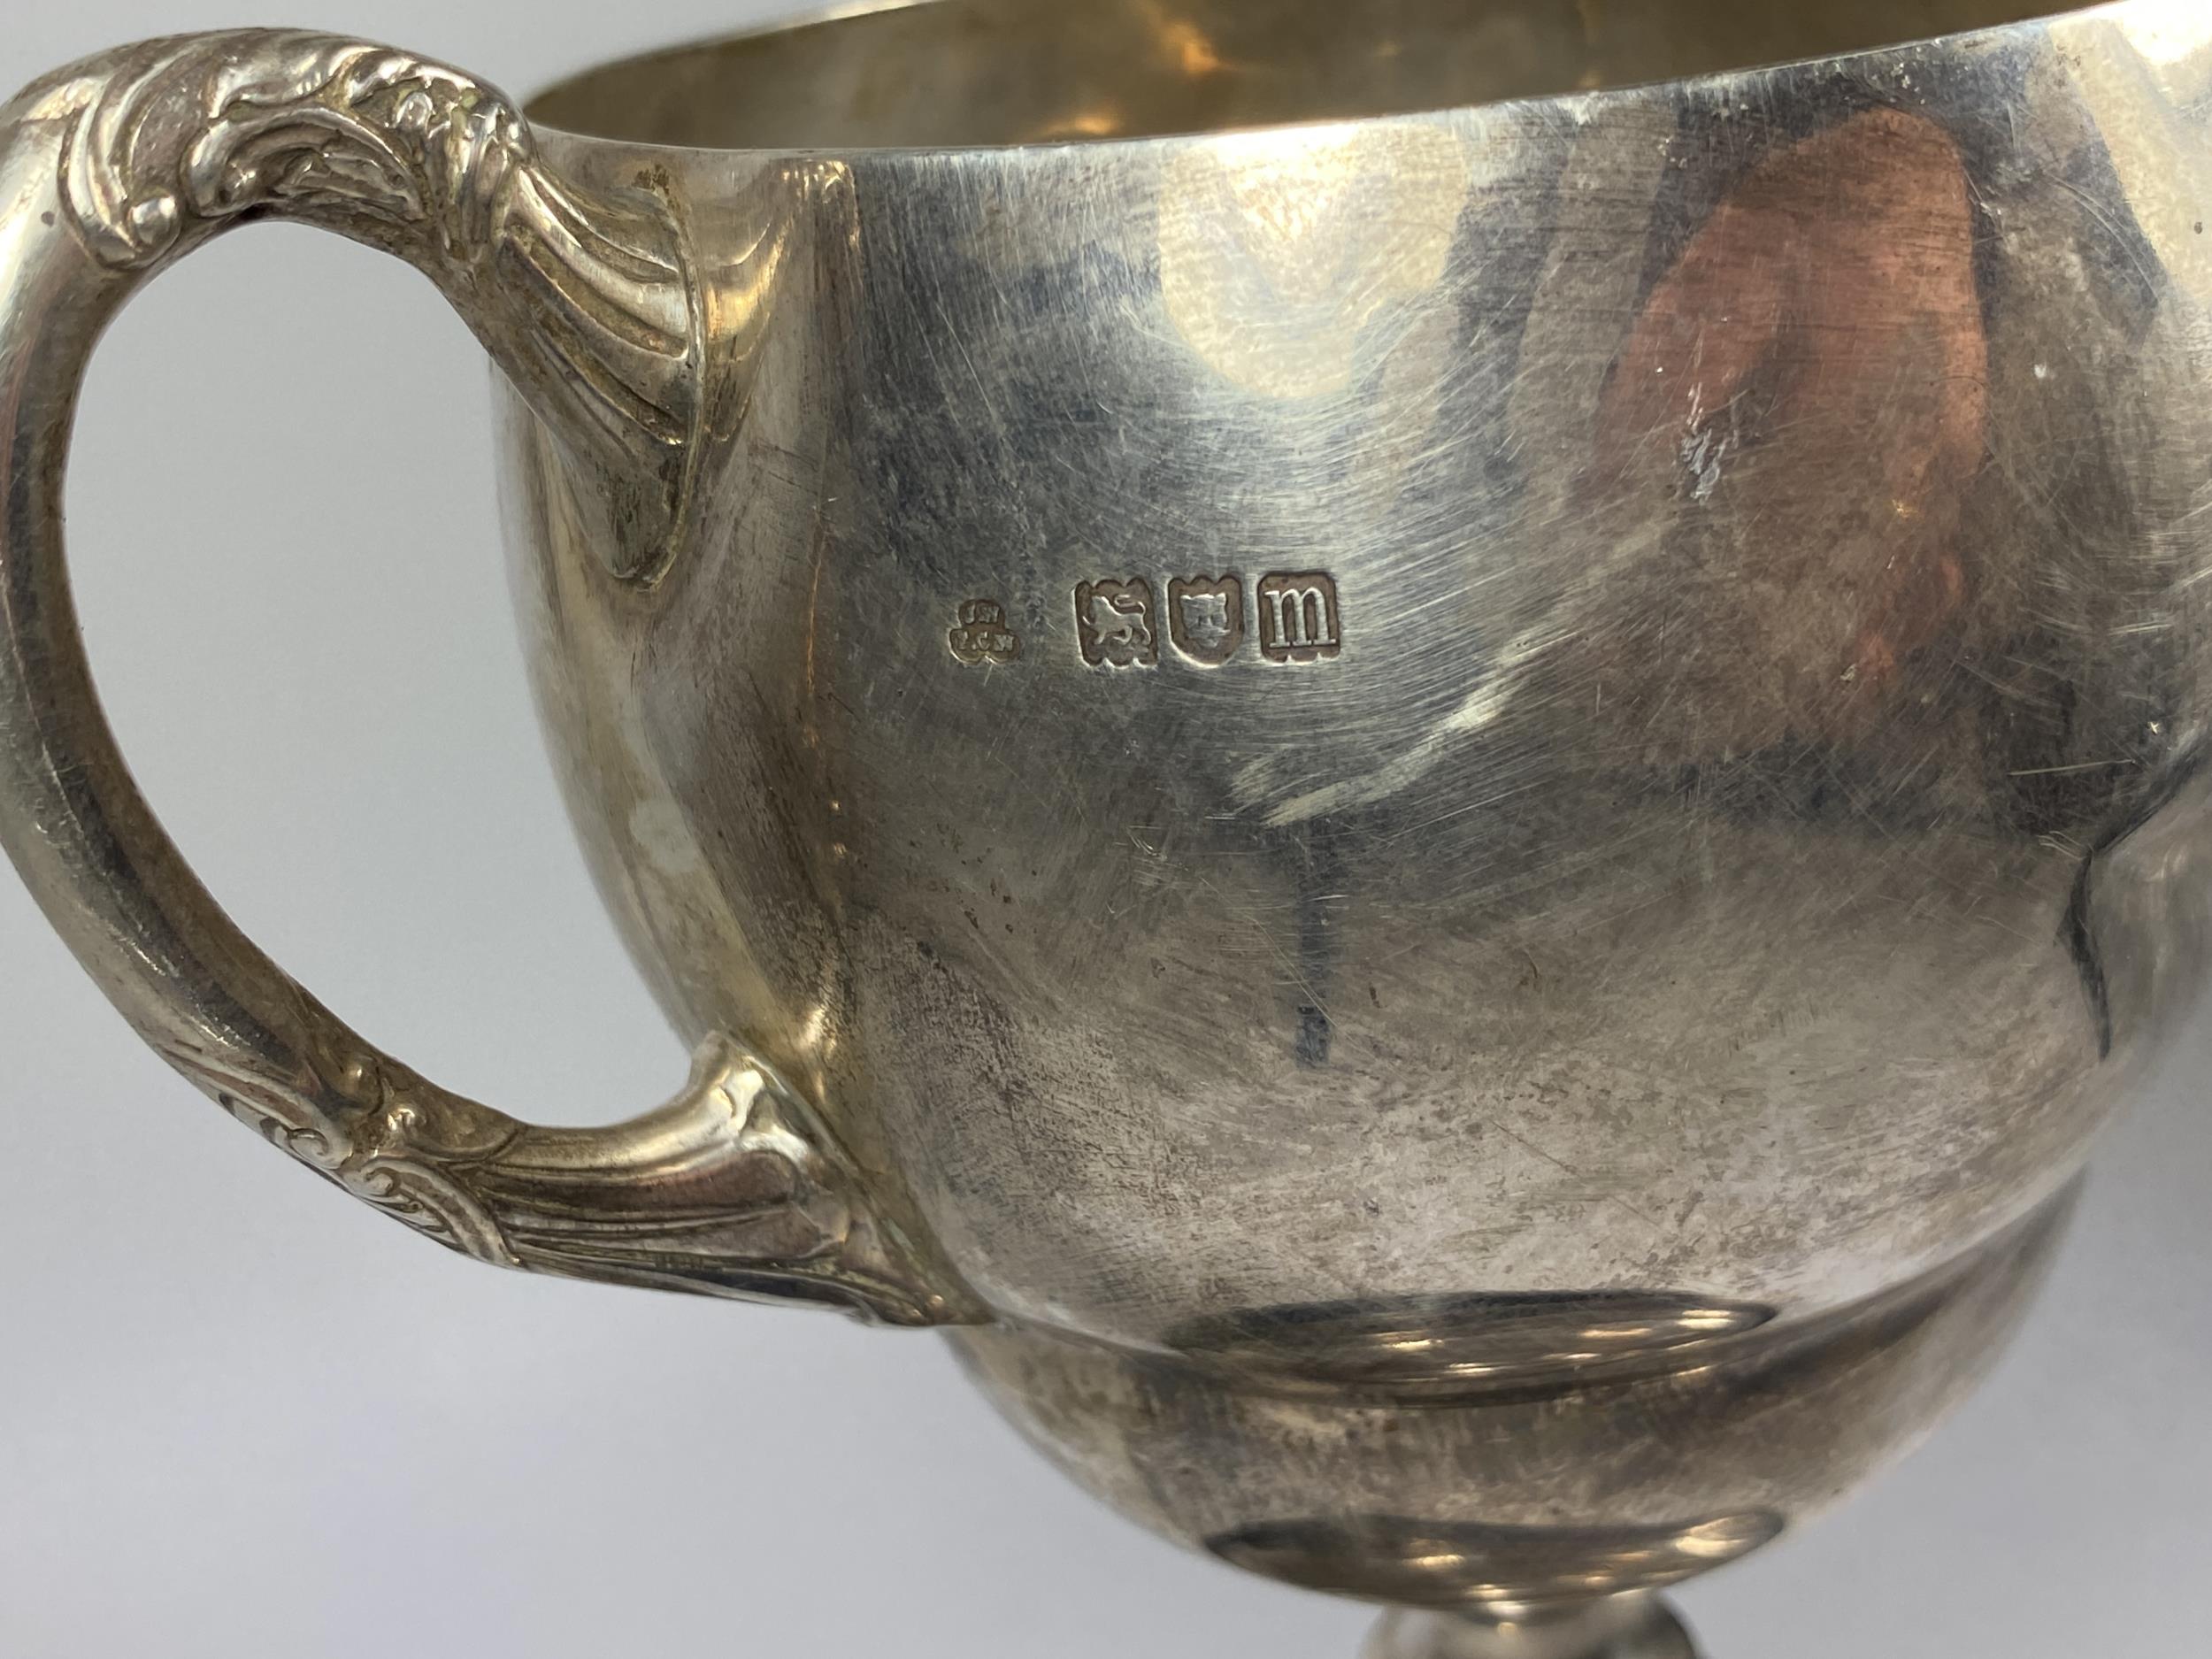 A GEORGE V SILVER TROPHY CUP, HALLMARKS FOR WAKELY & WHEELER, LONDON, 1927, INSCRIBED BRITISH - Image 5 of 5